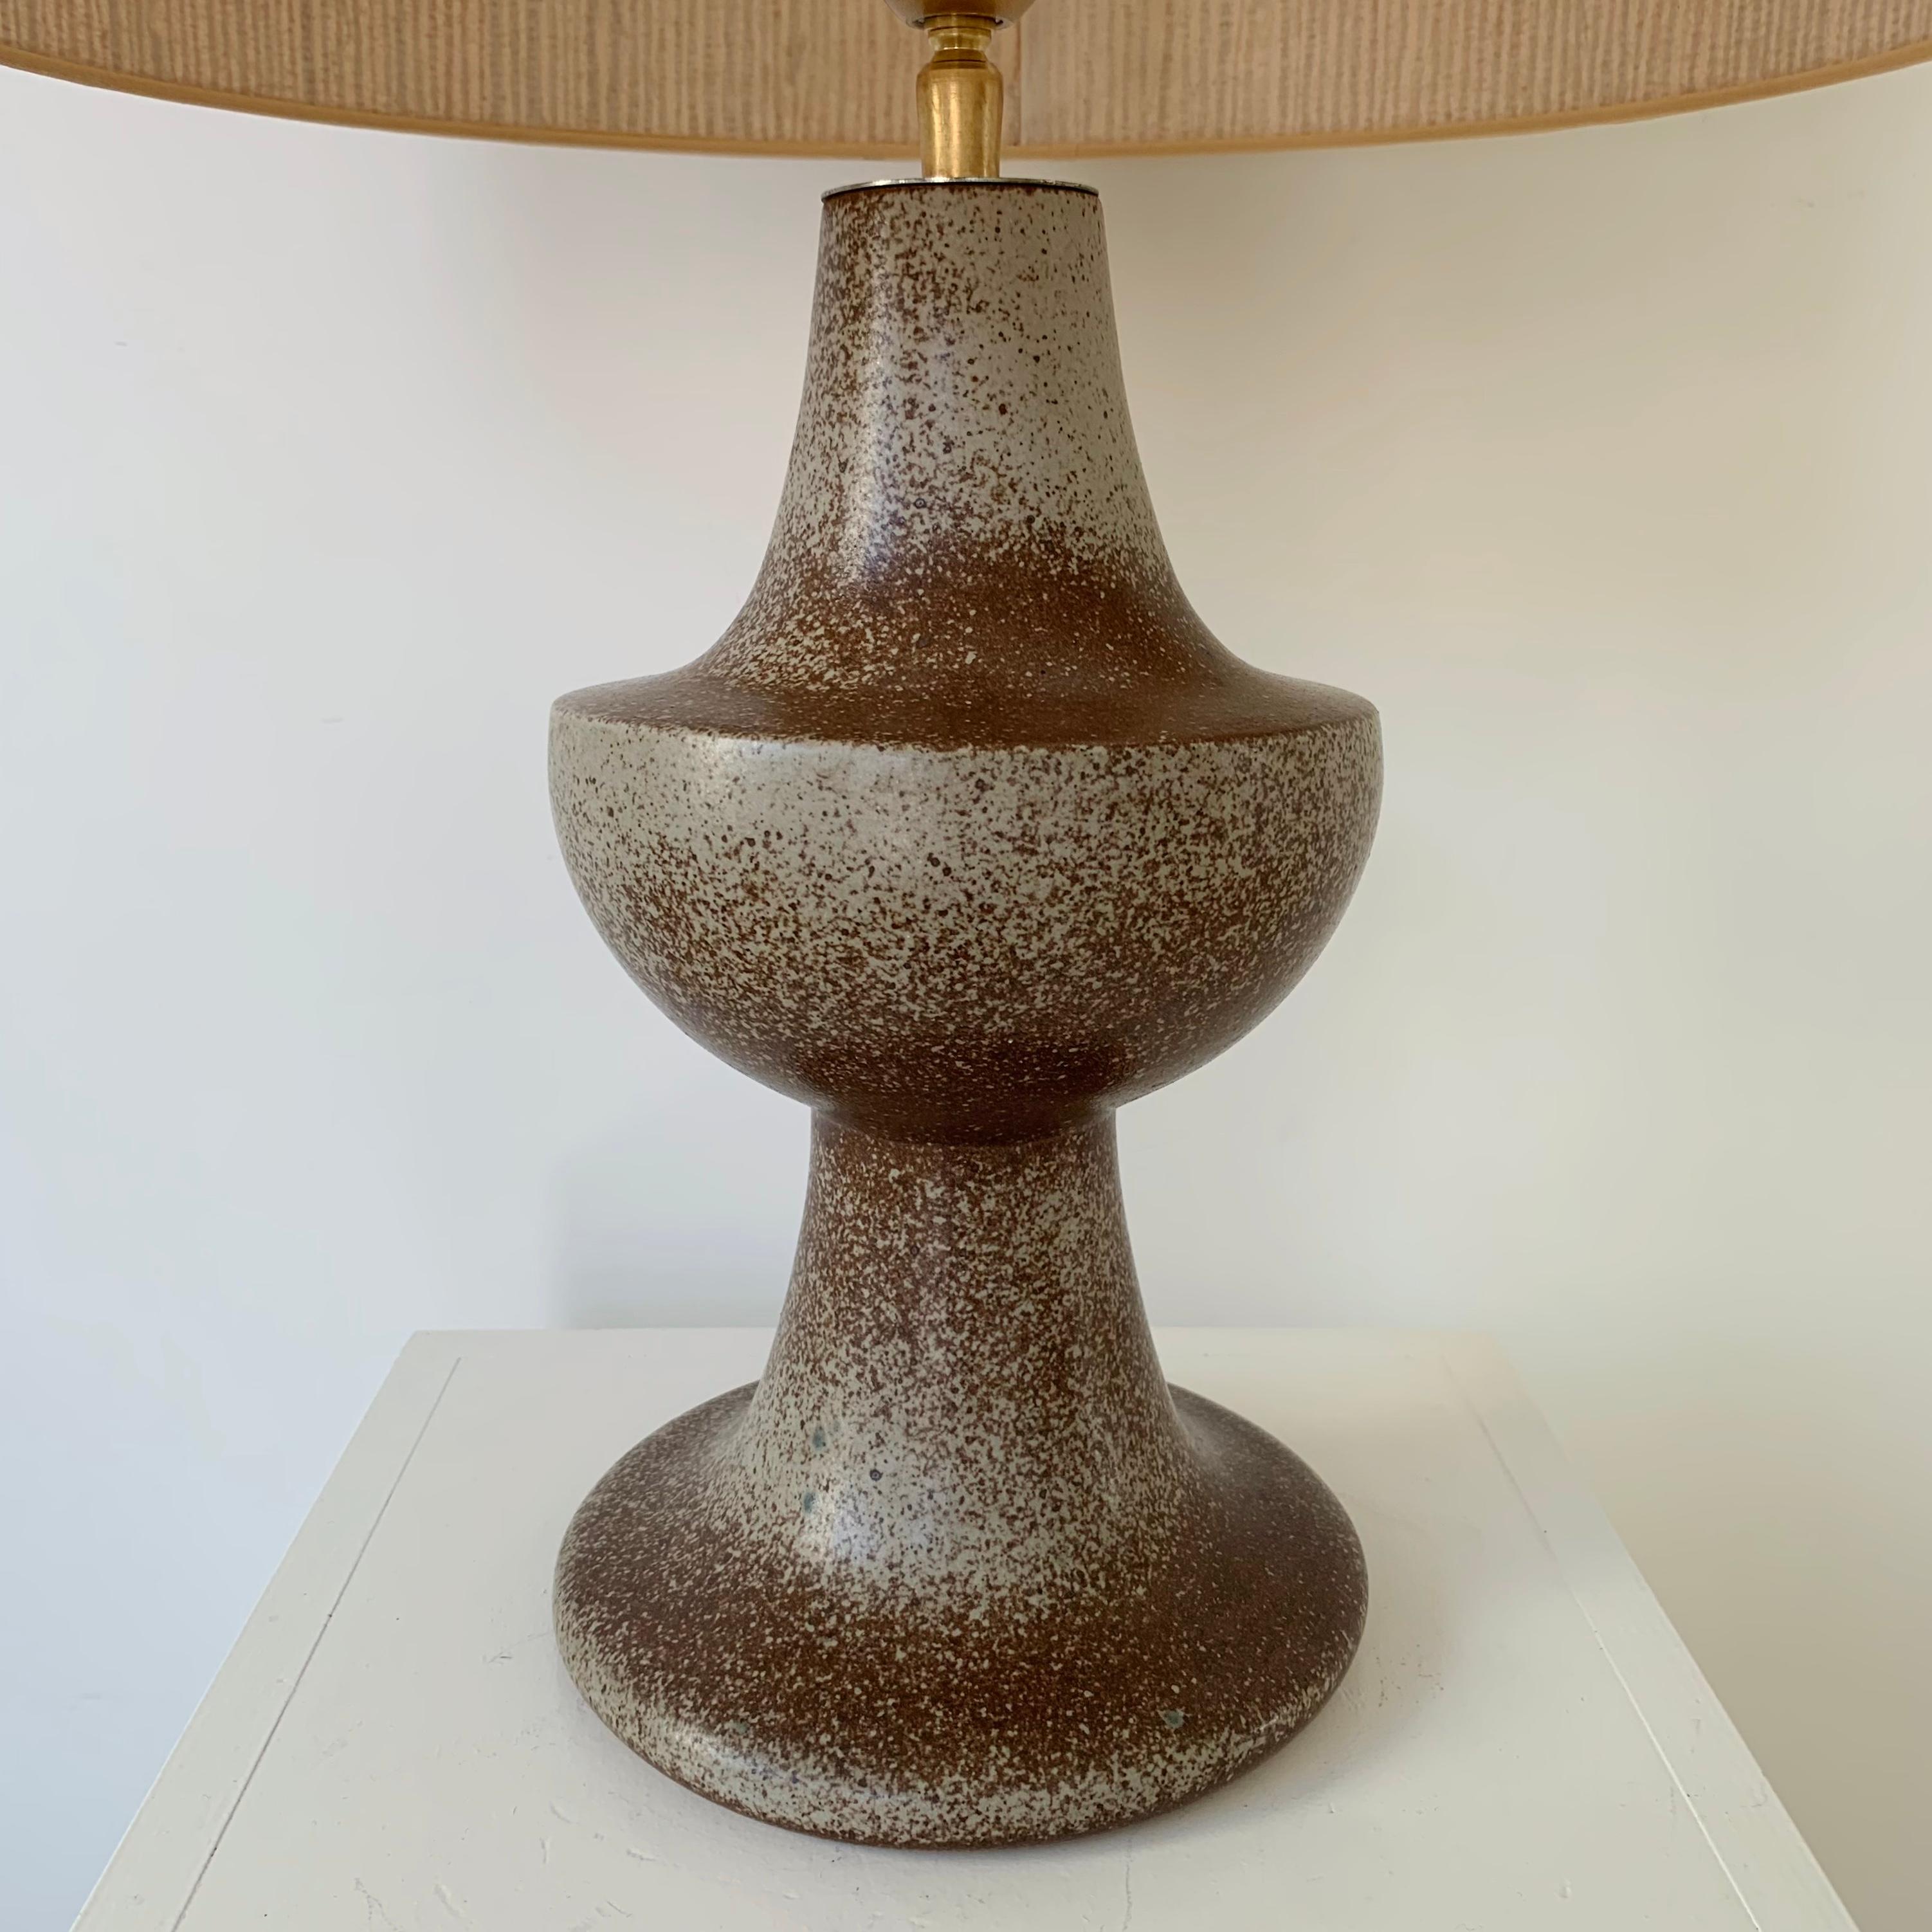 Enameled Midcentury Ceramic Table Lamp, circa 1960, France For Sale